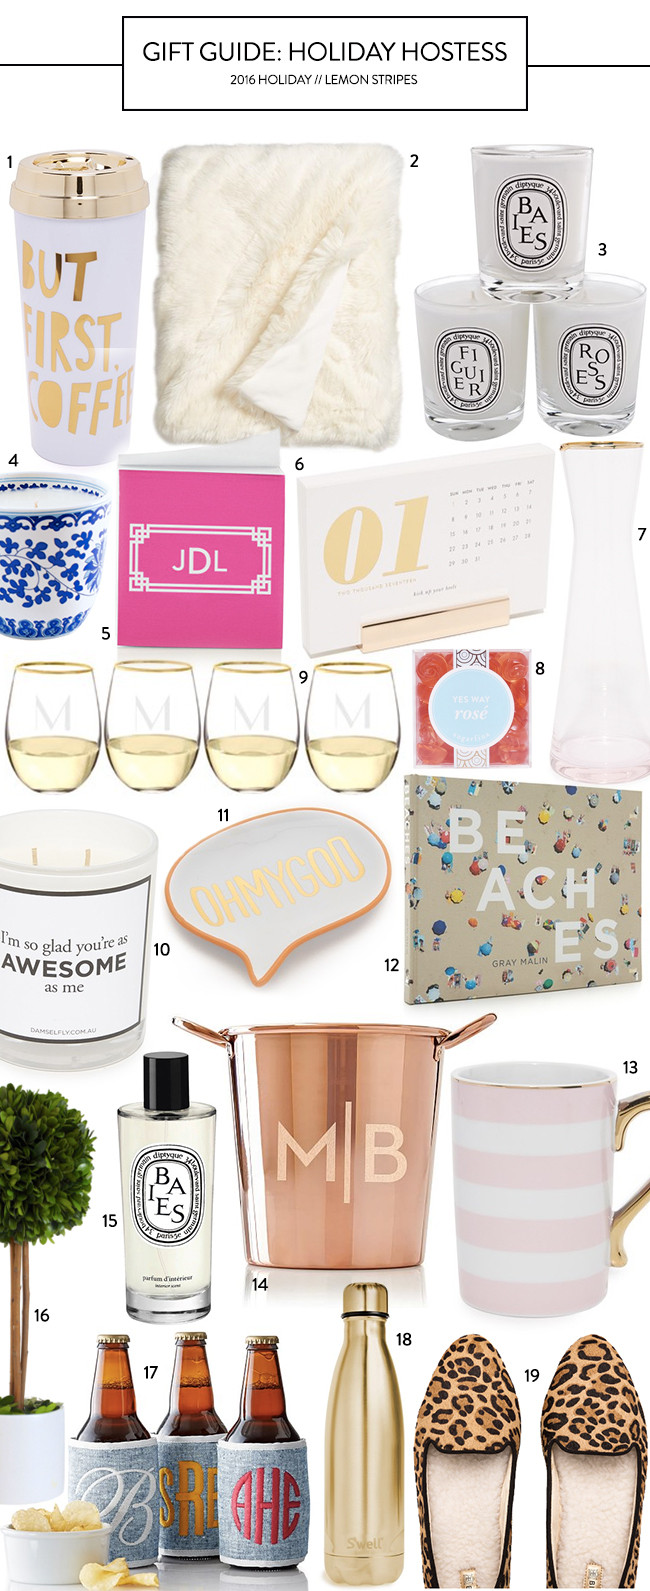 Holiday Party Gift Ideas For The Hostess
 Holiday Hostess Gifts Lemon Stripes